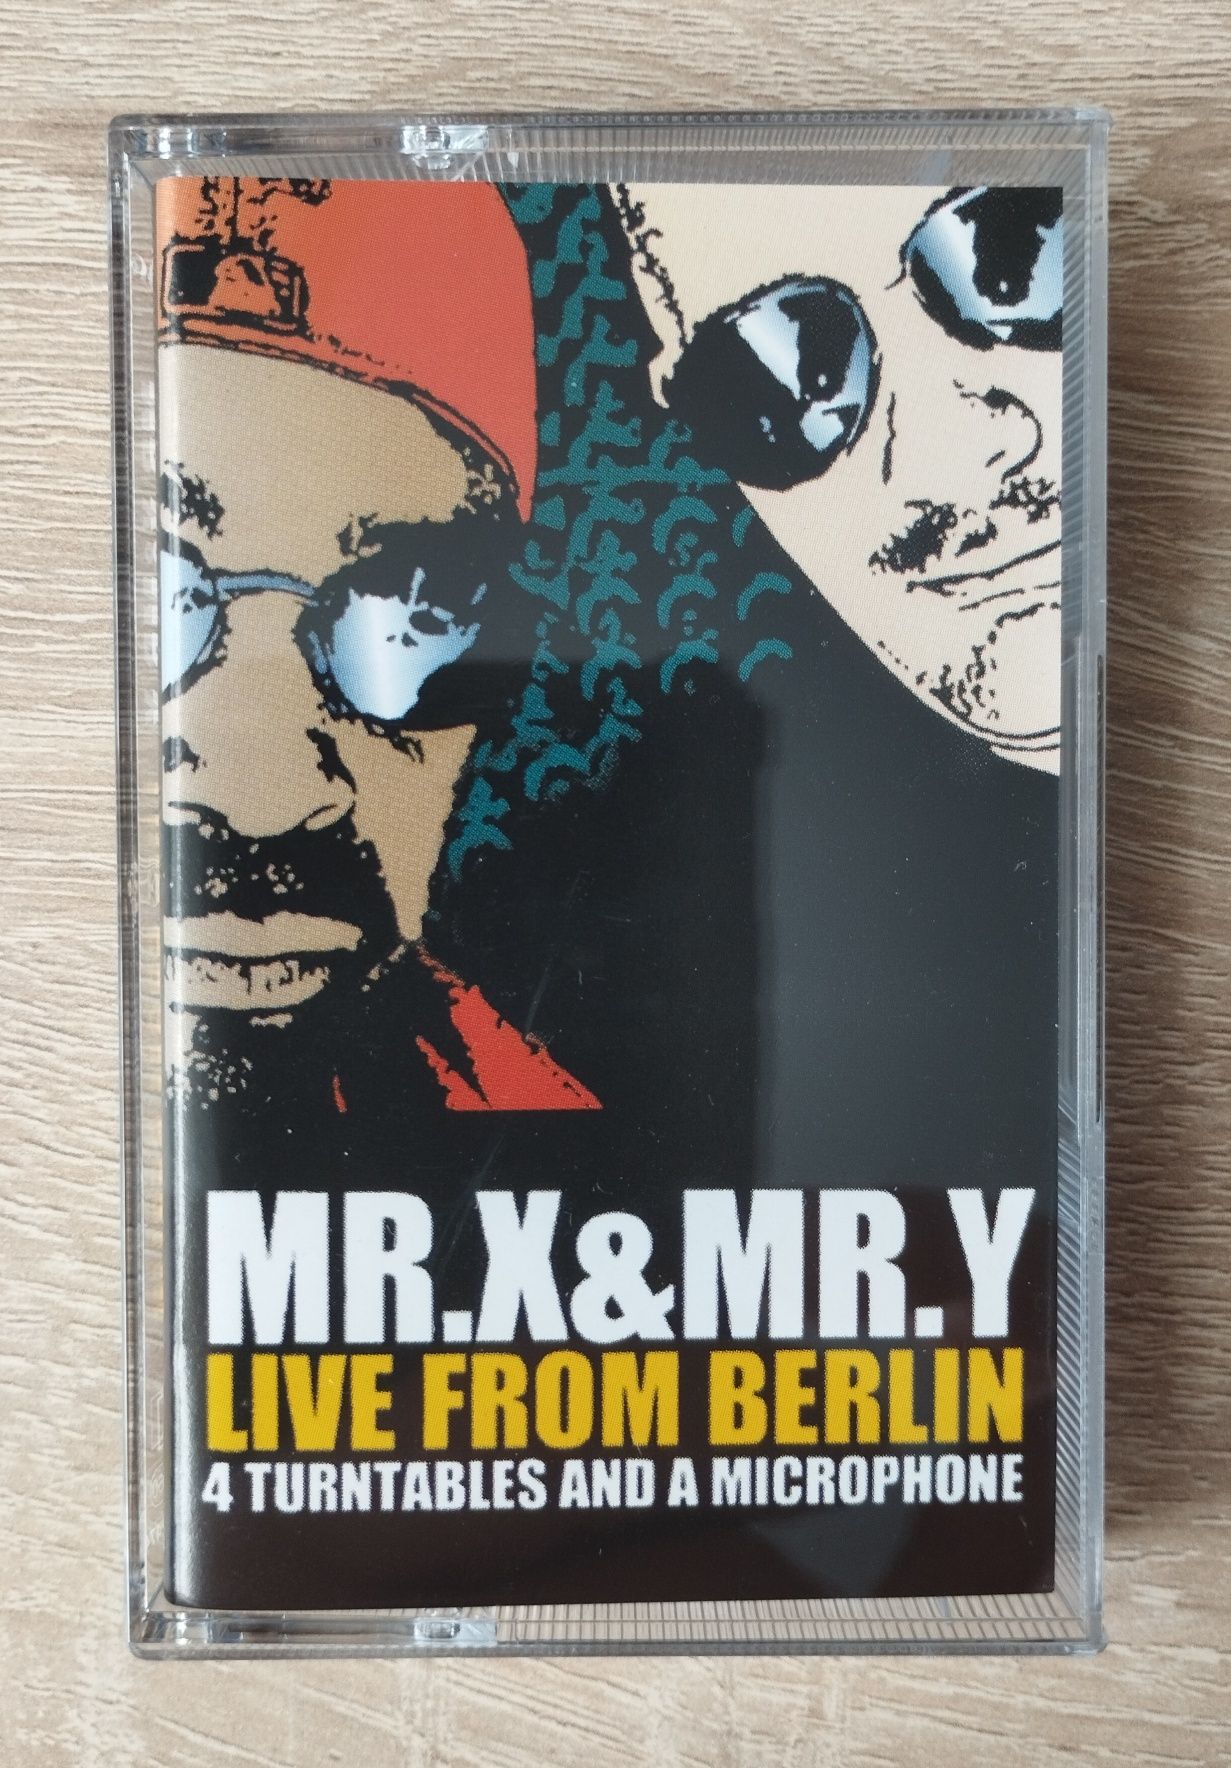 Mr. X & Mr. Y – Live From Berlin - 4 Turntables and A Microphone